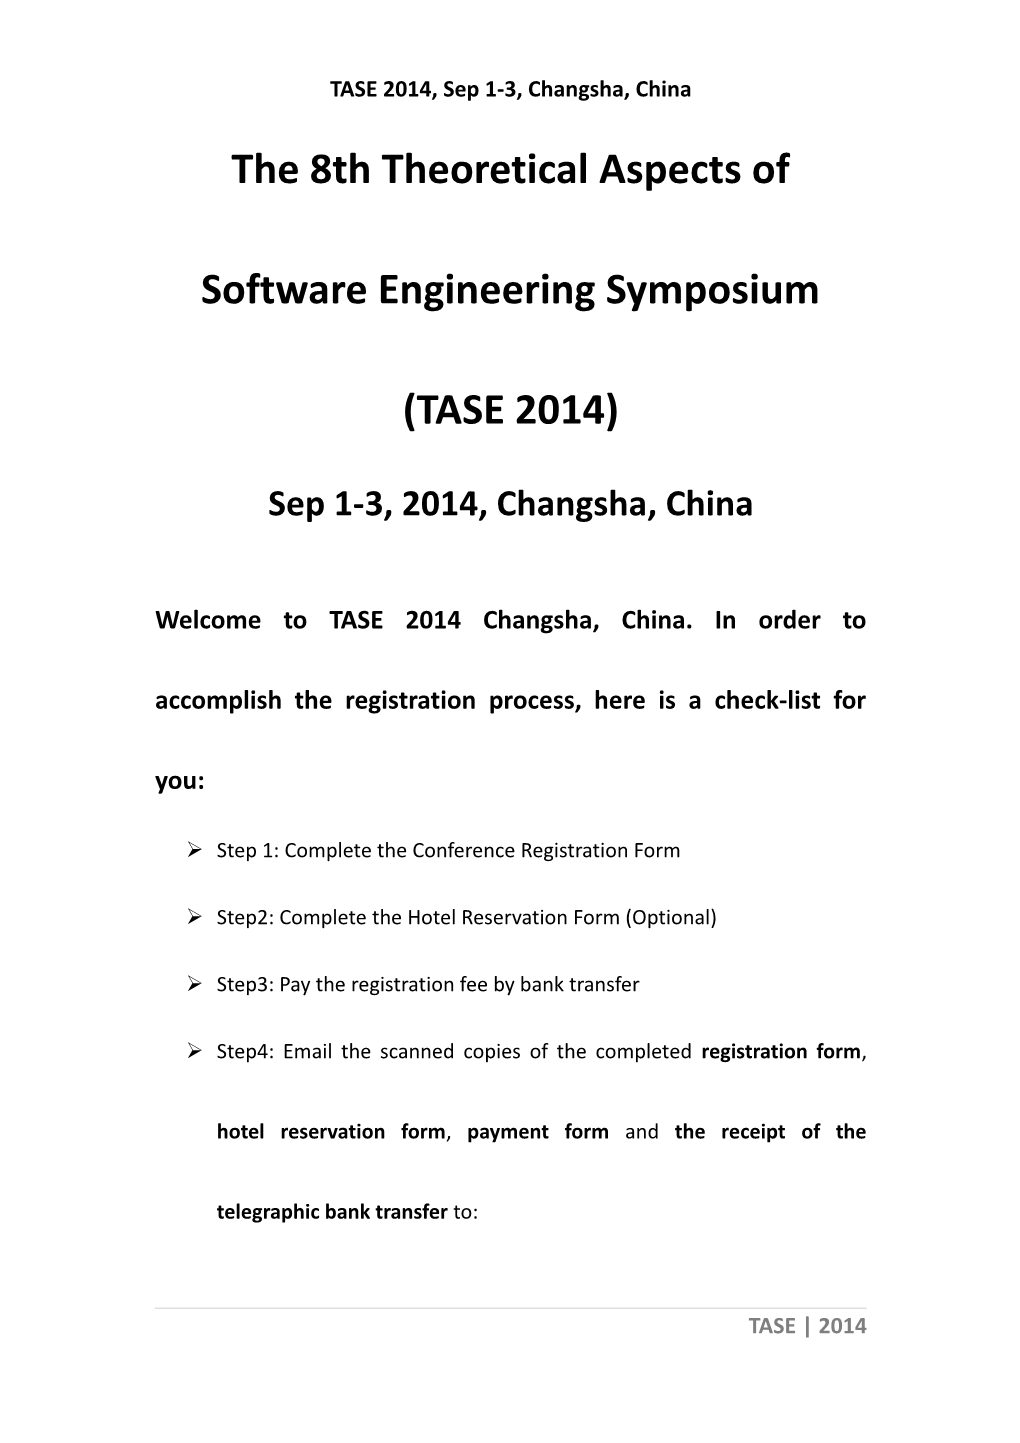 The 8Th Theoretical Aspects of Software Engineering Symposium (TASE 2014)